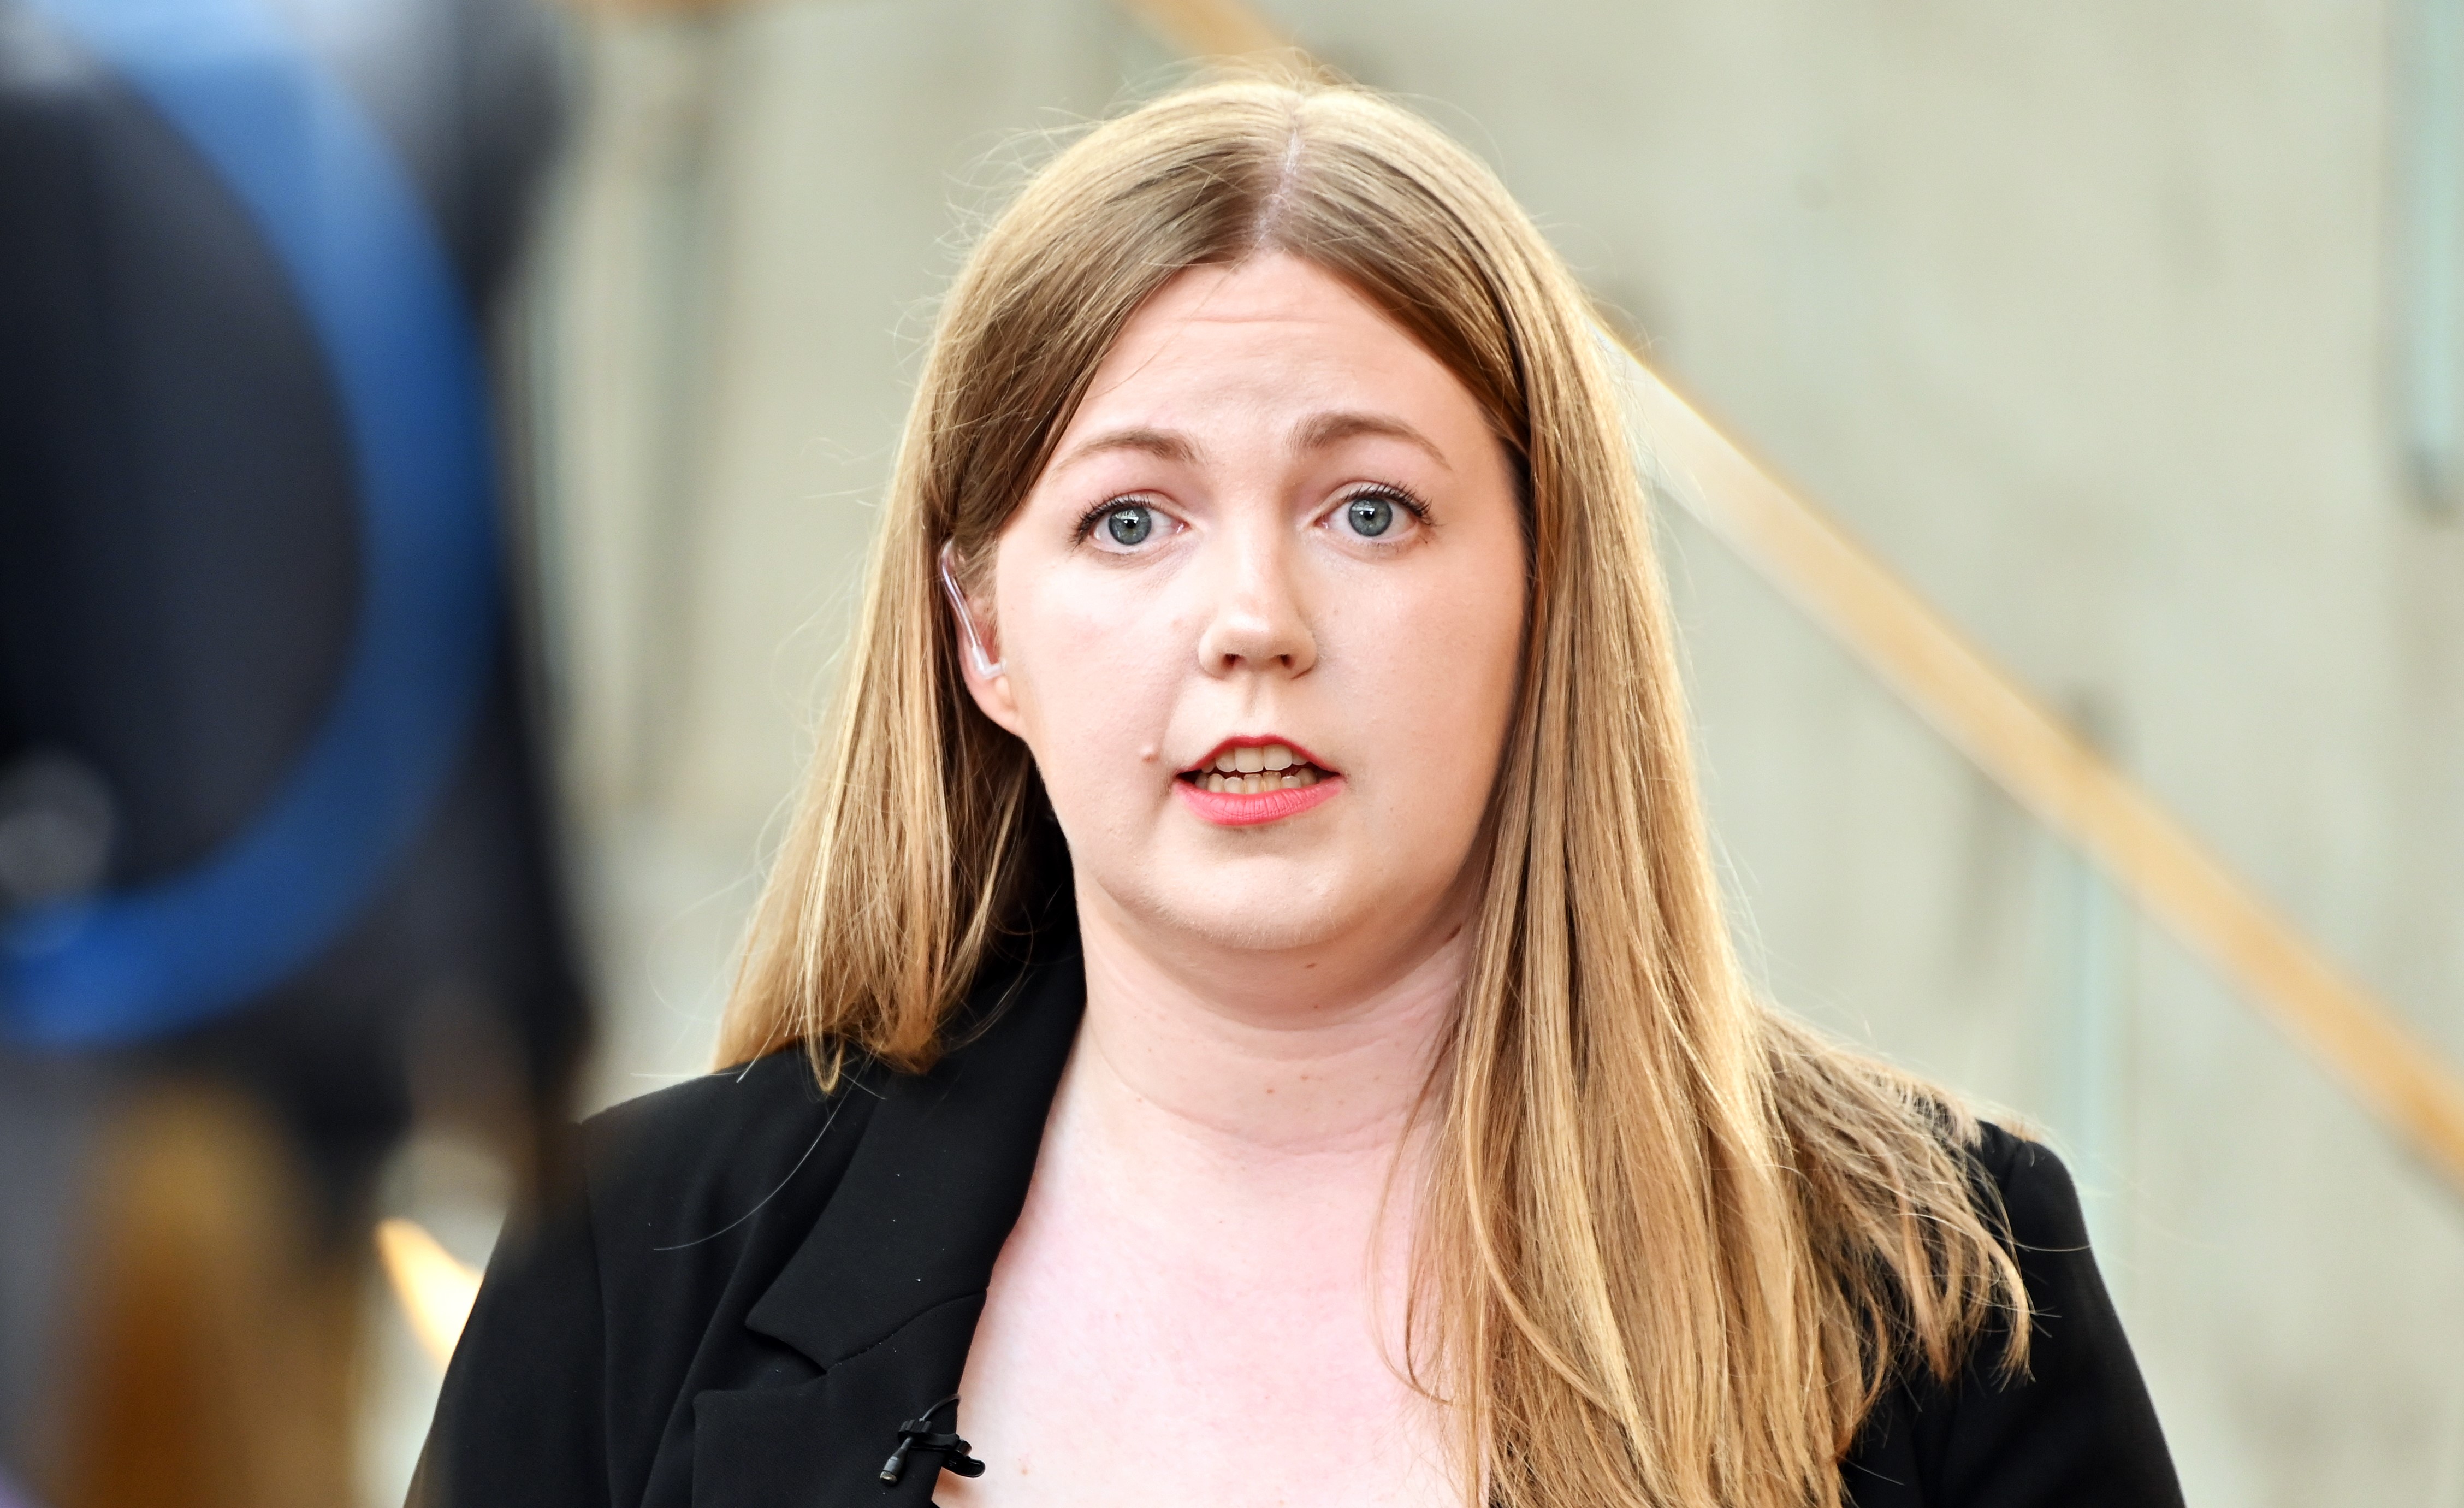 Greens MSP Gillian Mackay accused Labour of playing political games.